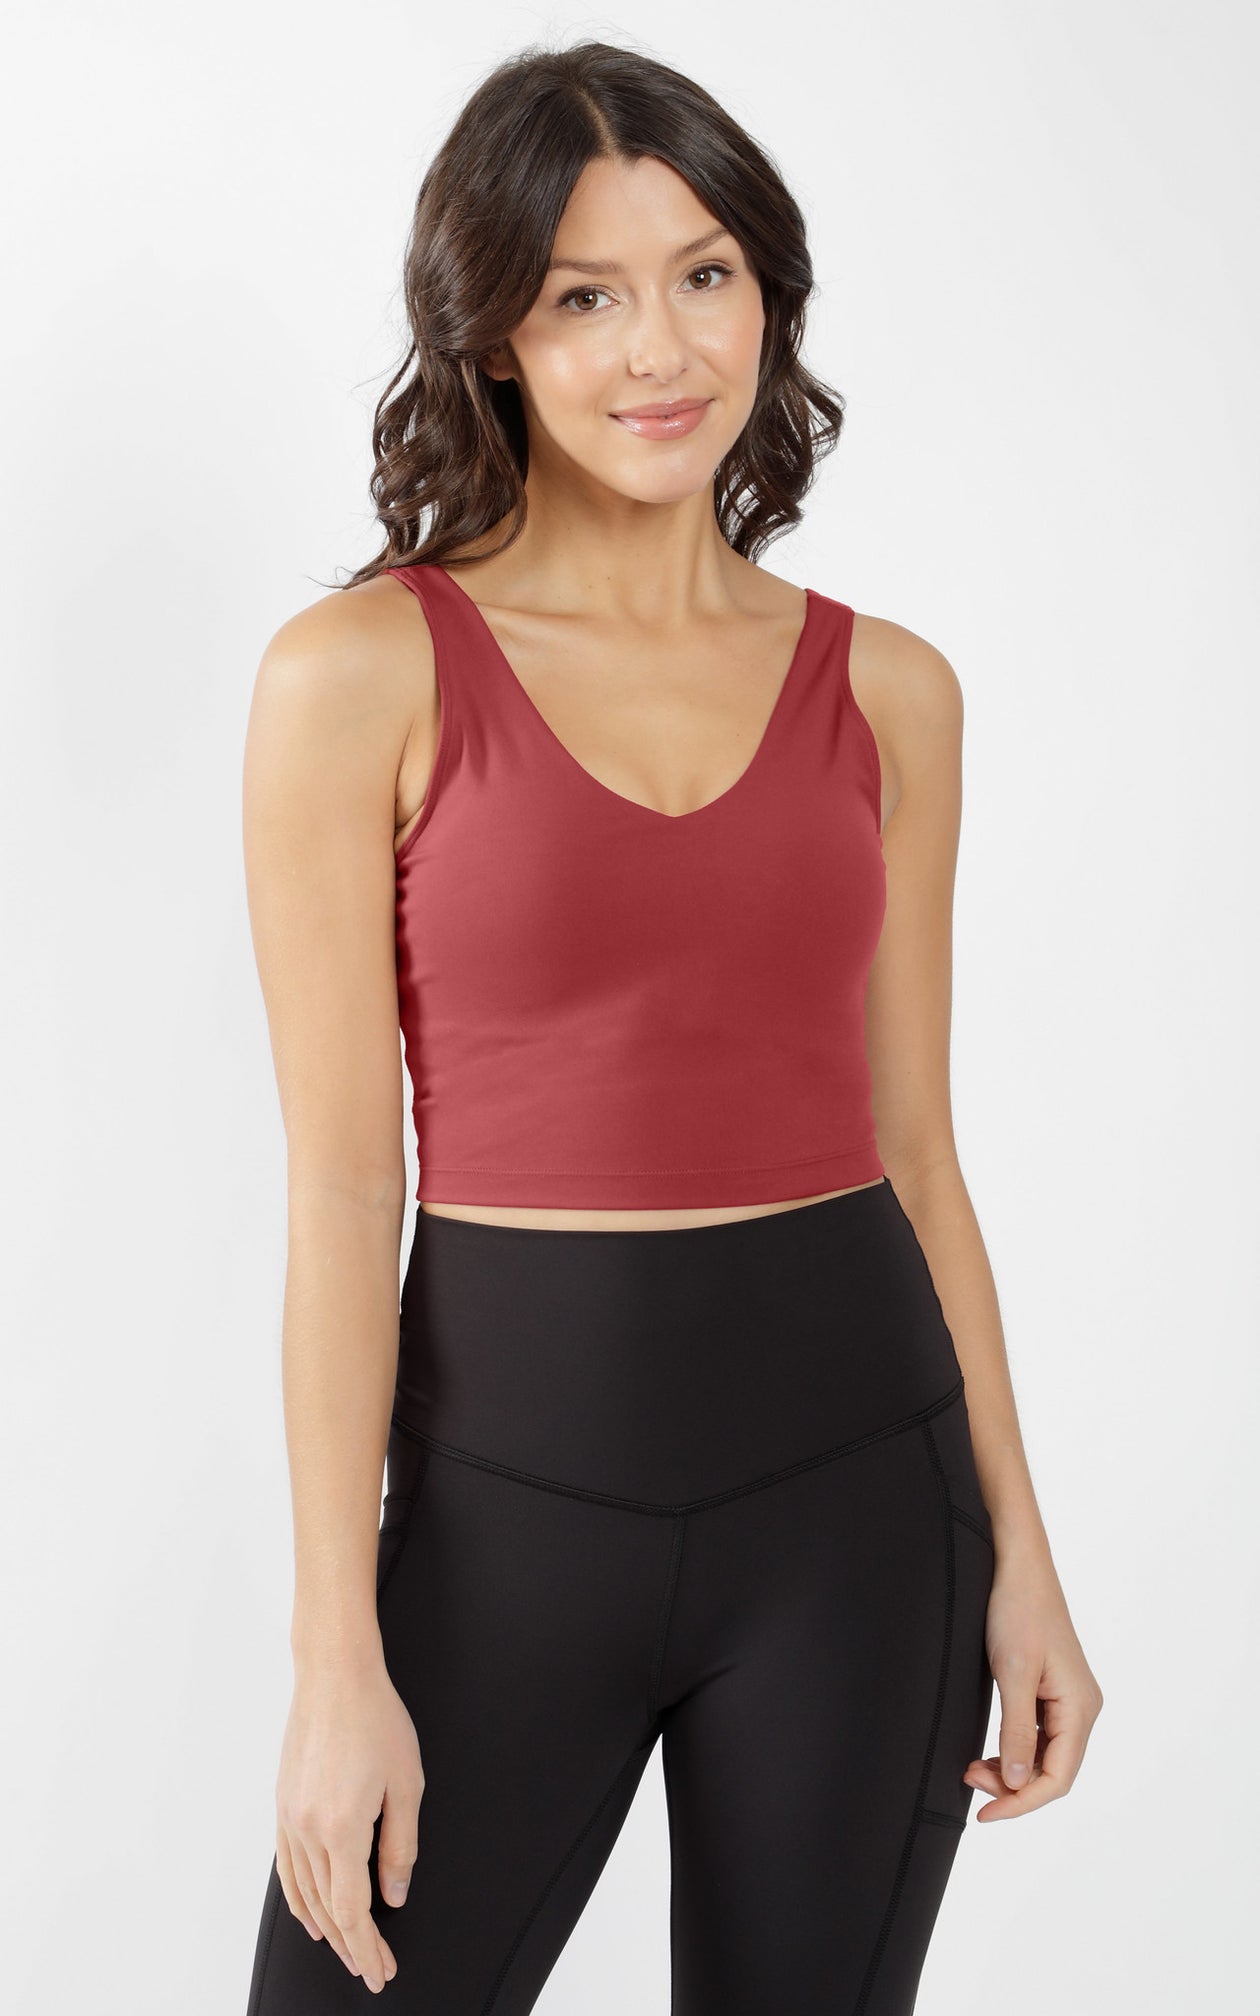 Yogalicious Lux Women's Active Tank Crop Top w/ Build-in Bra Size